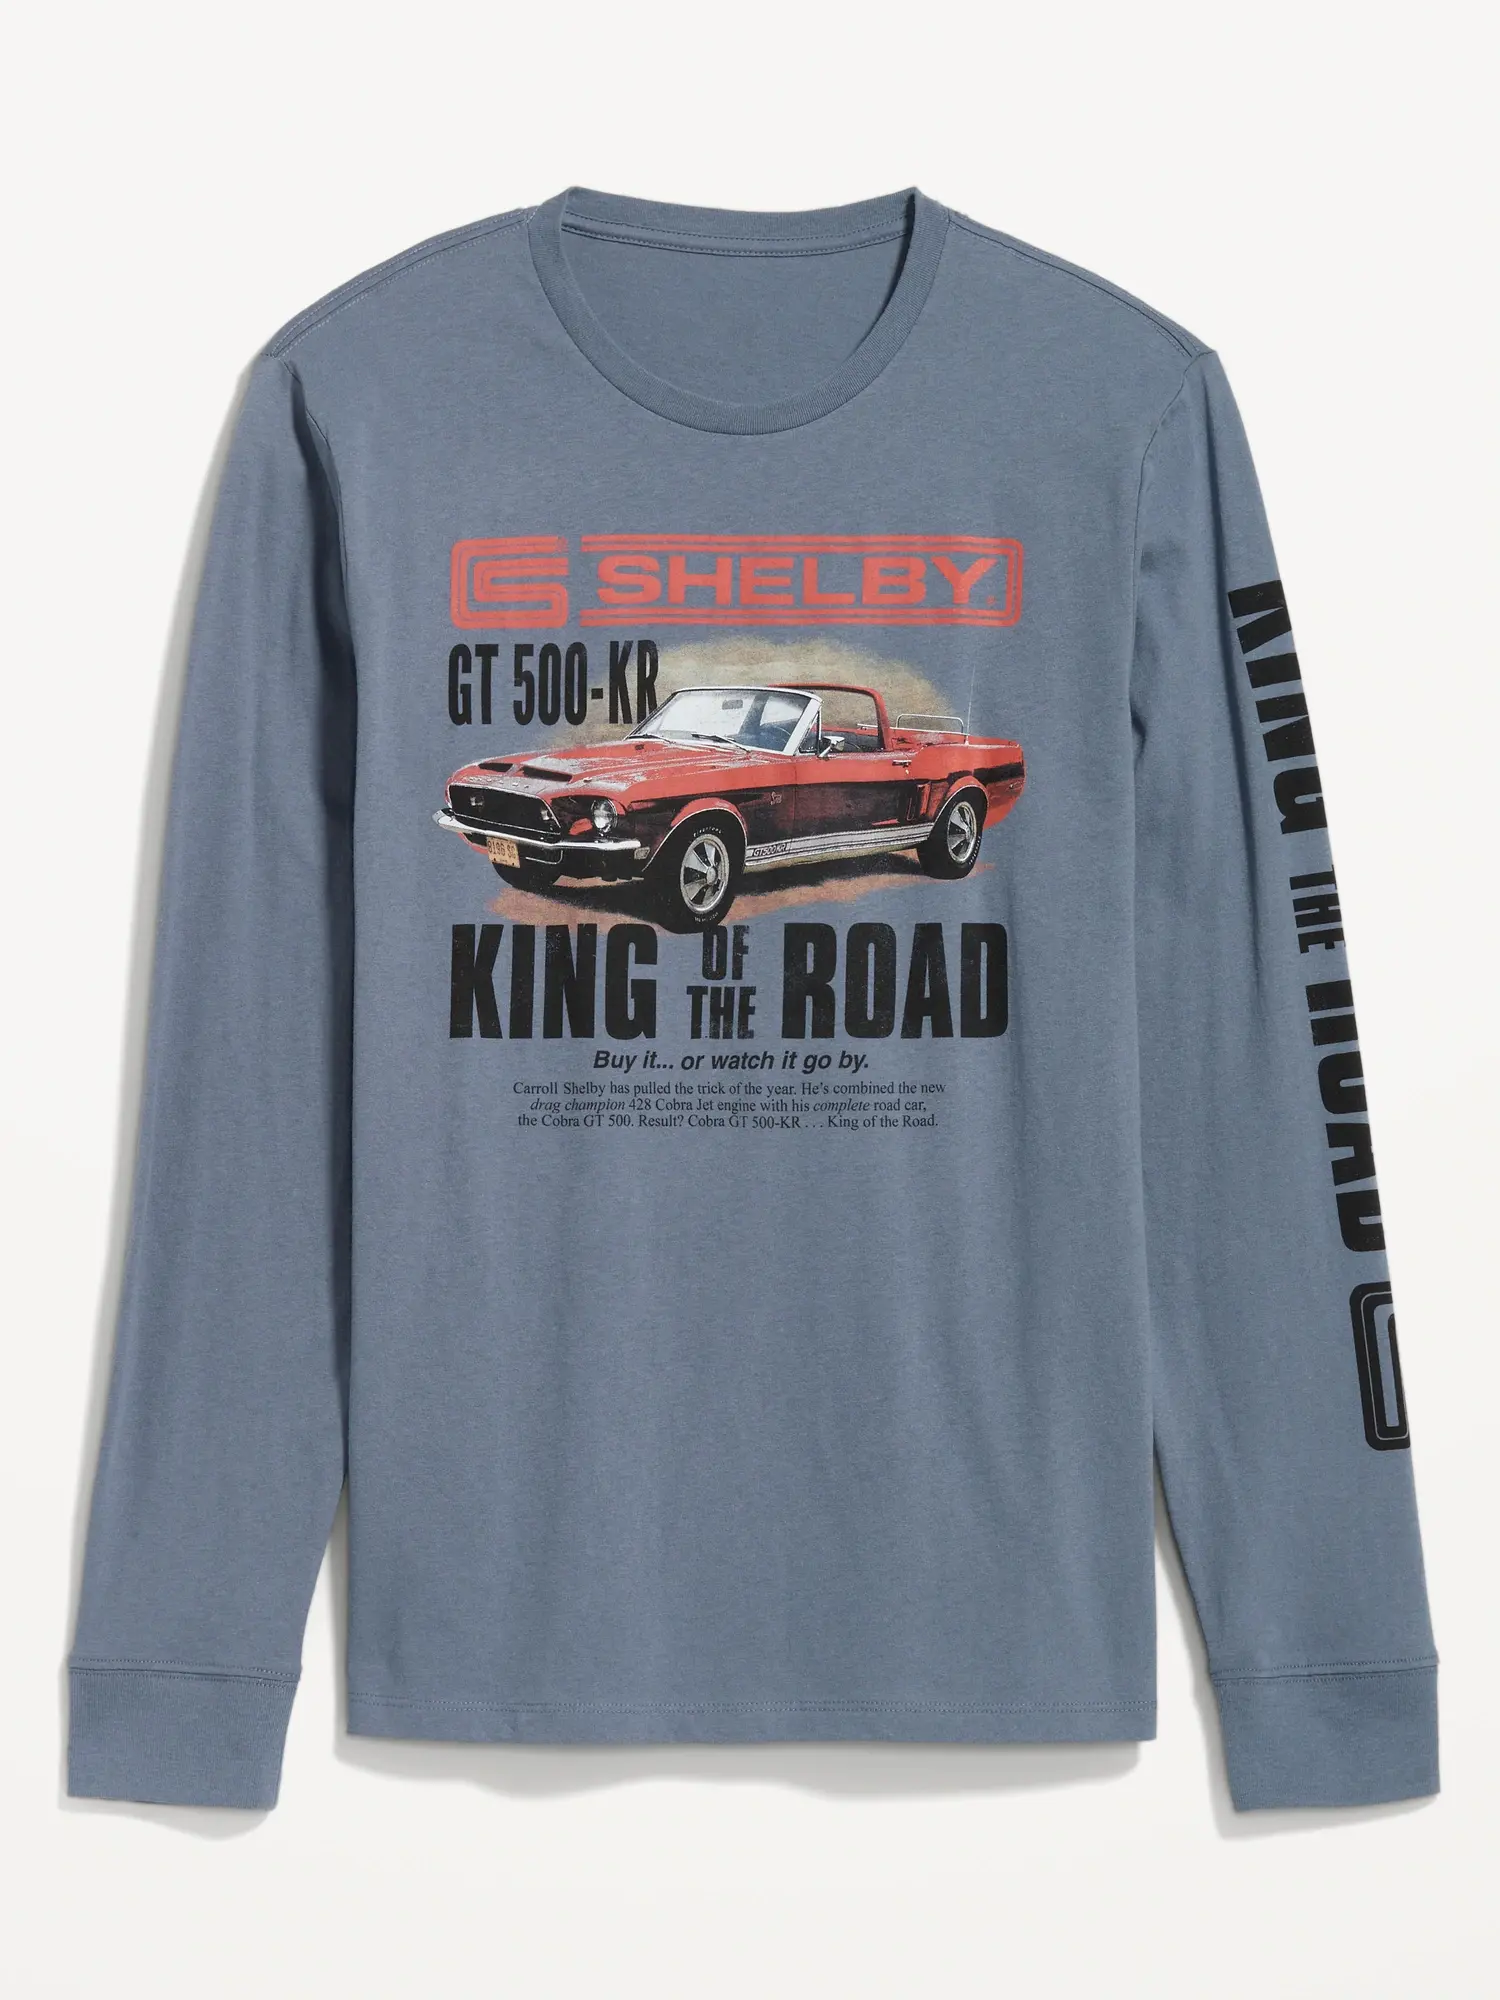 Old Navy Shelby Mustang™ "King of the Road" Gender-Neutral Long-Sleeve T-Shirt for Adults blue. 1